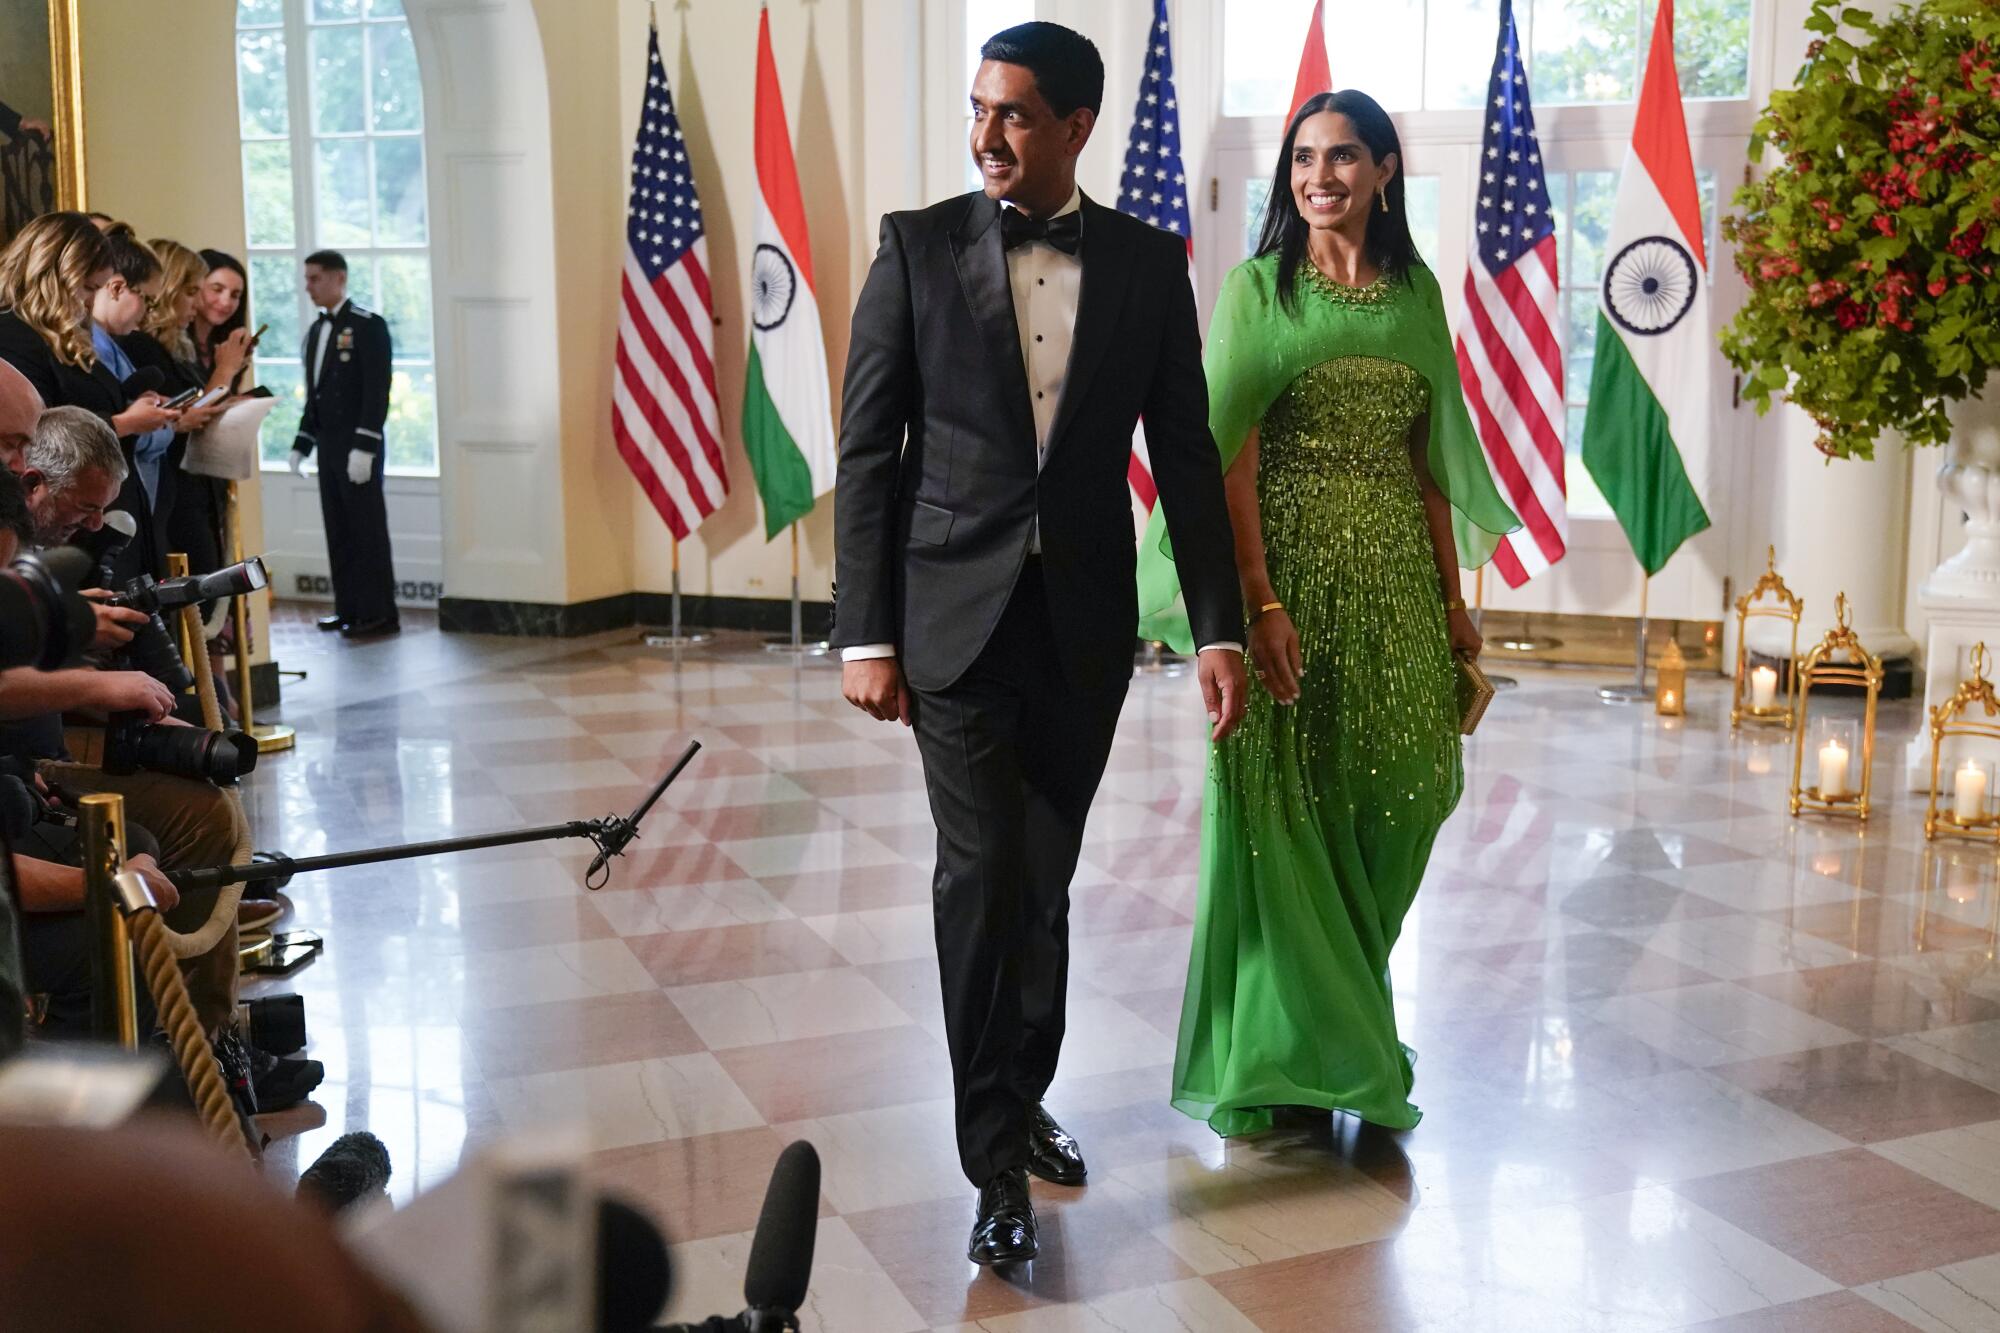 Rep. Ro Khanna, D-Calif., and his wife Ritu Khanna arrive for the State Dinner at the White House